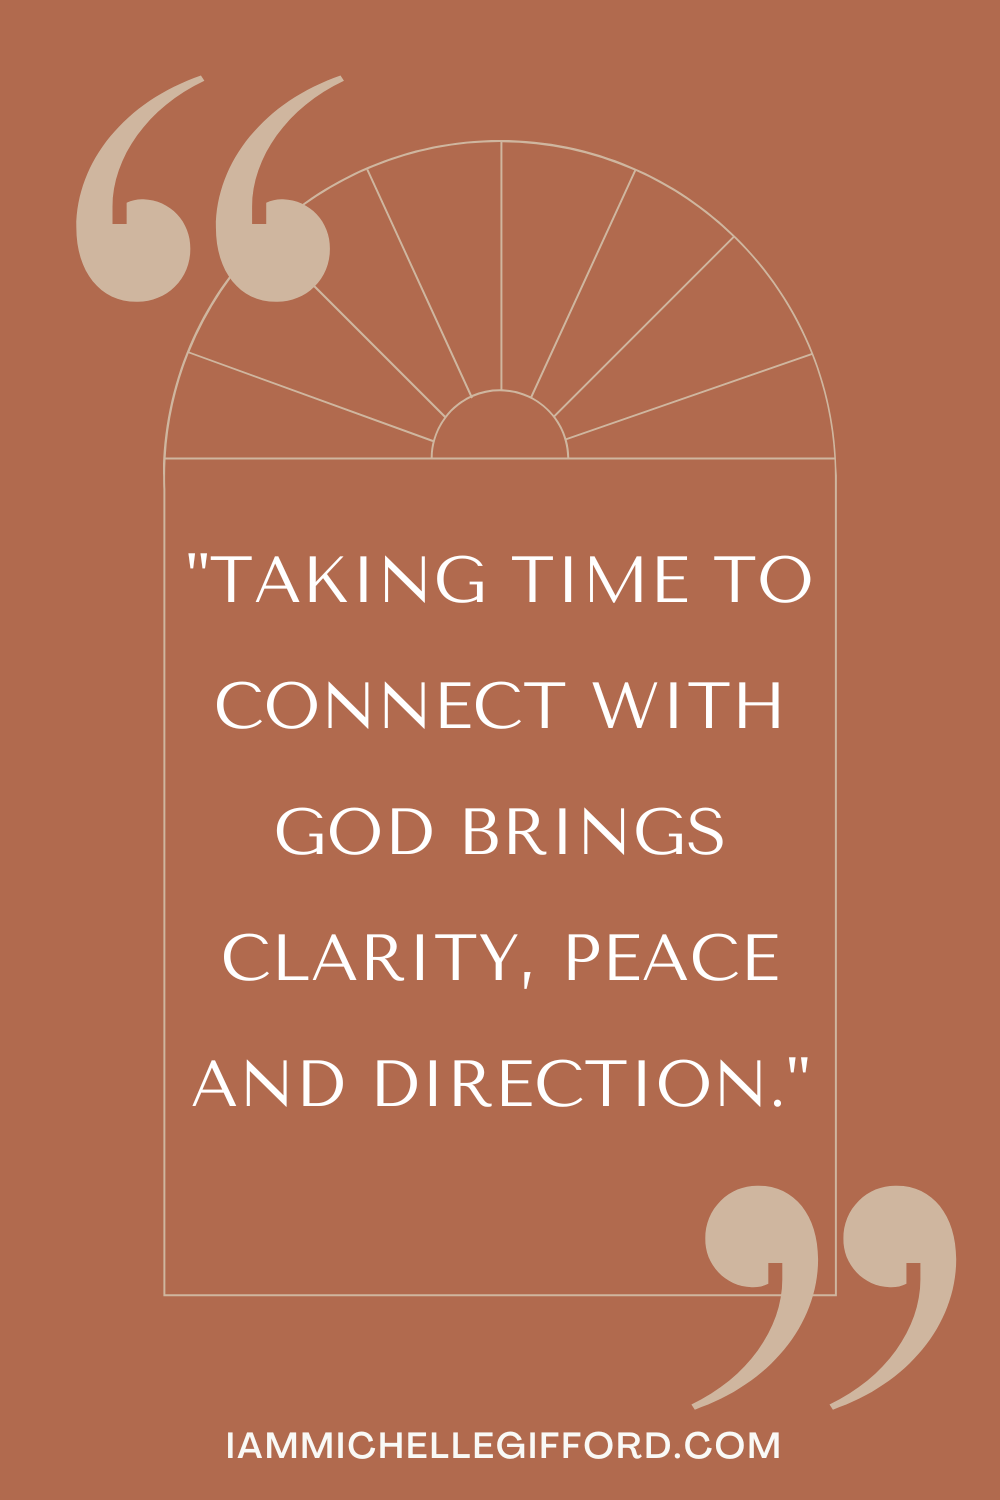 "Taking time to connect with God, brings clarity, peace and direction." 